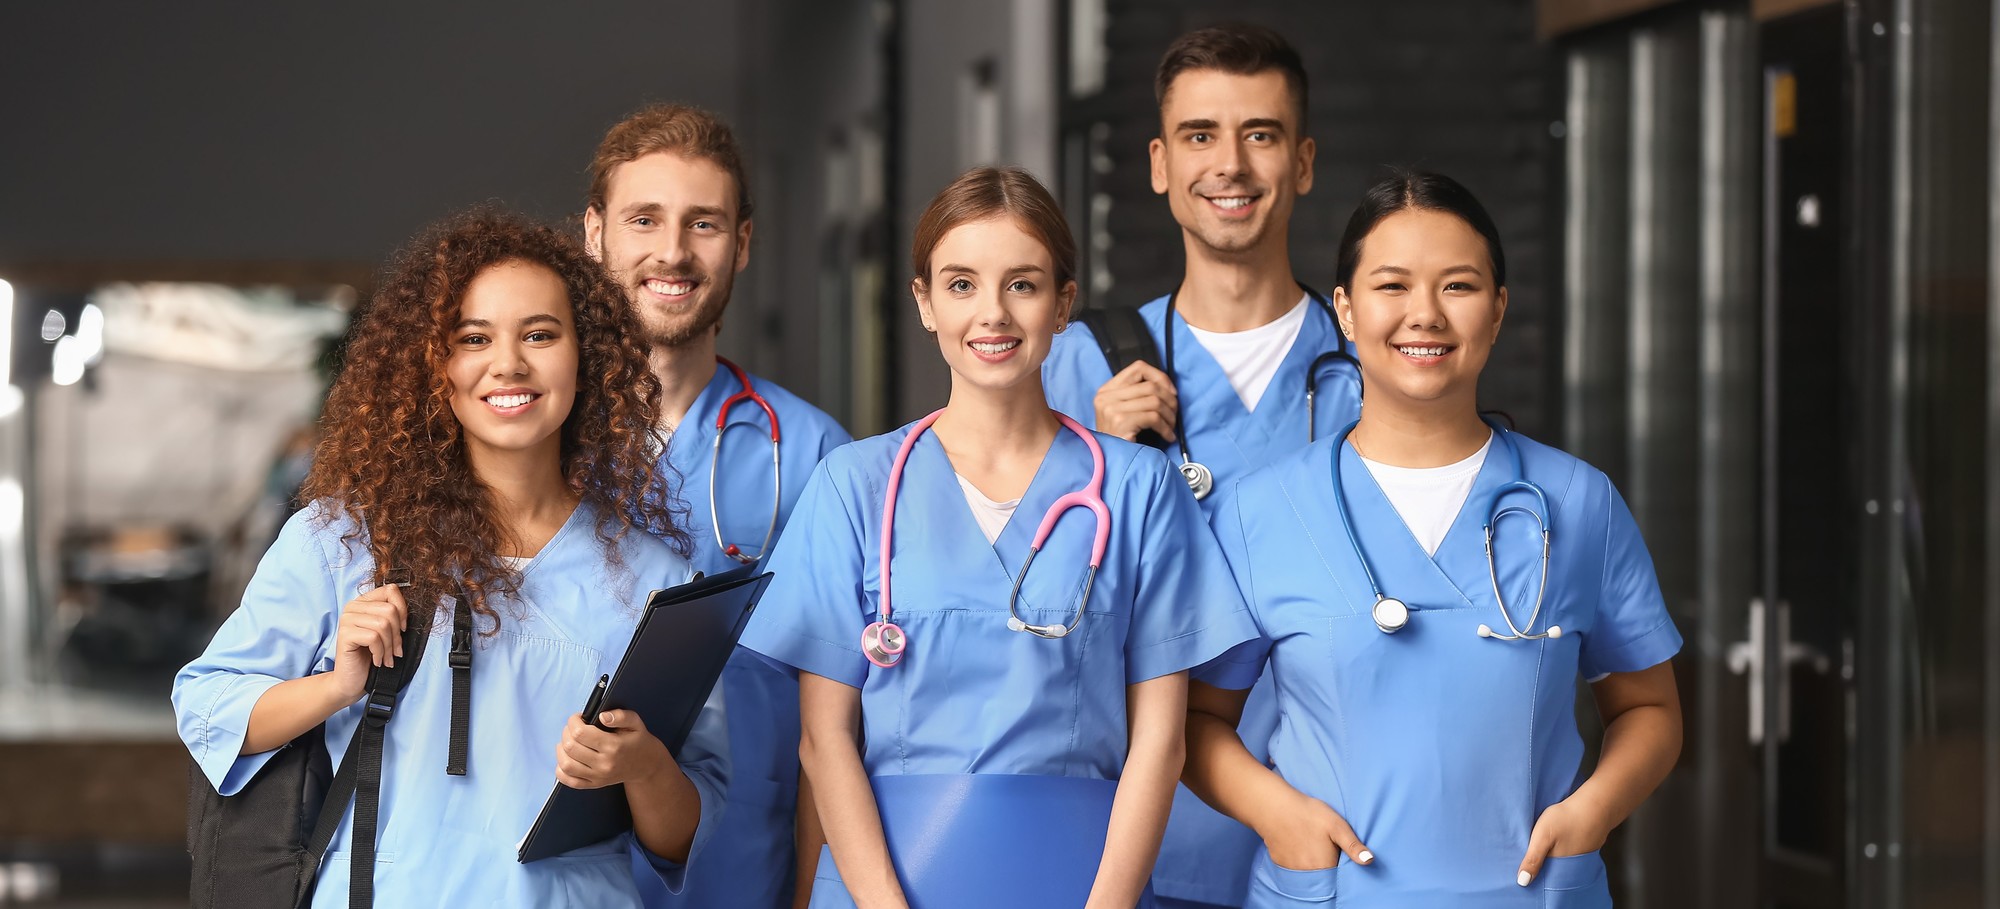 Reasons for Retraining as a Medical Assistant